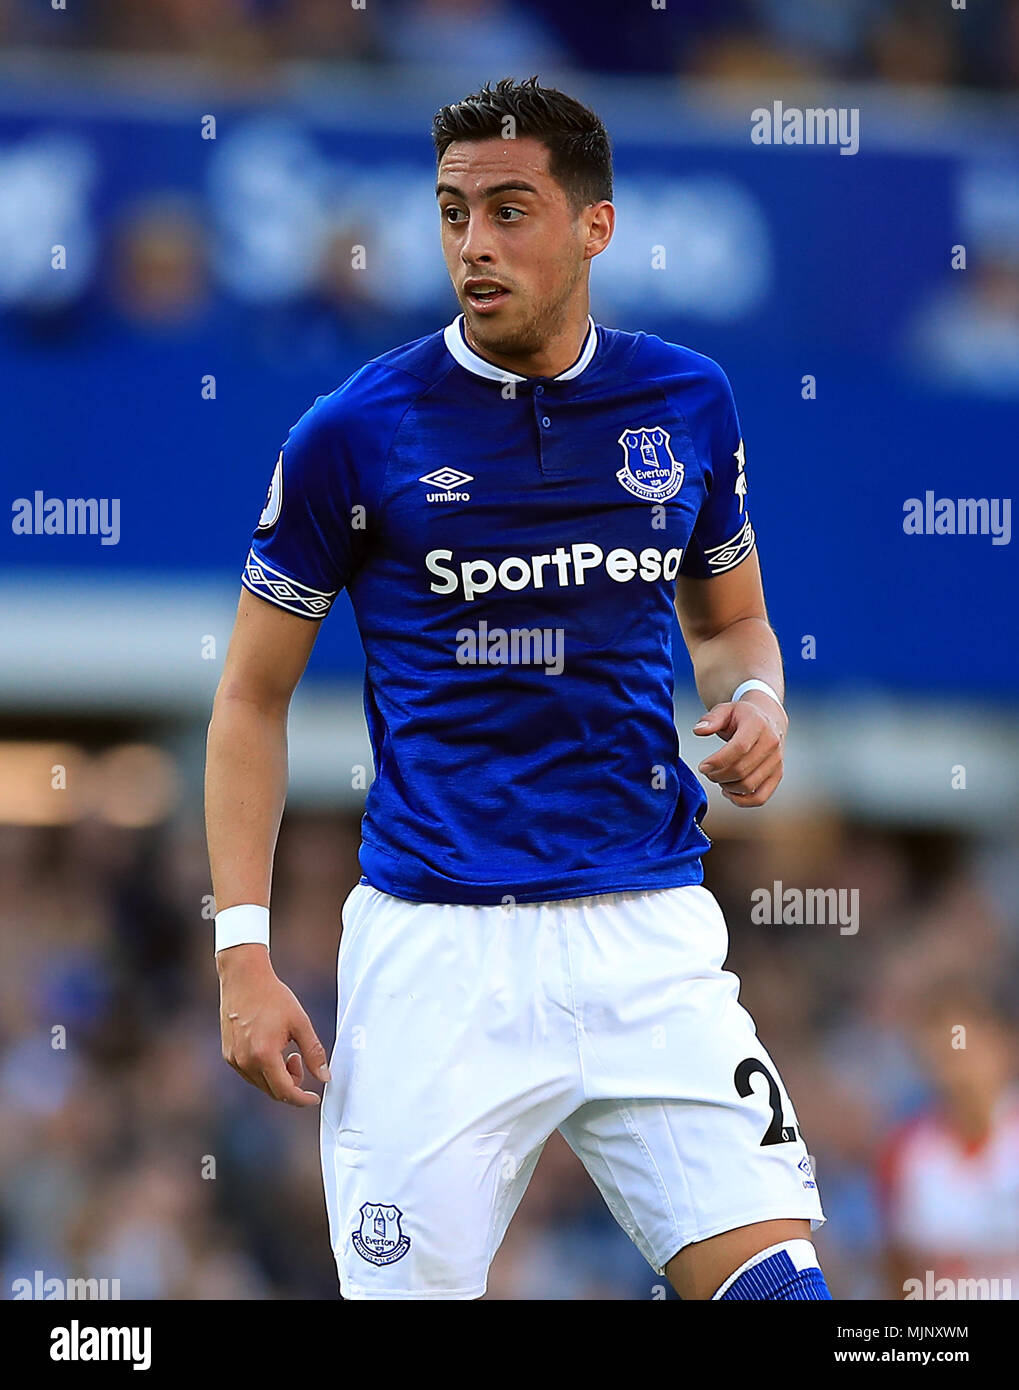 Evertons Ramiro Funes Mori during the Premier League match at Goodison Park, Liverpool. PRESS ASSOCIATION Photo. Picture date Saturday May 5, 2018